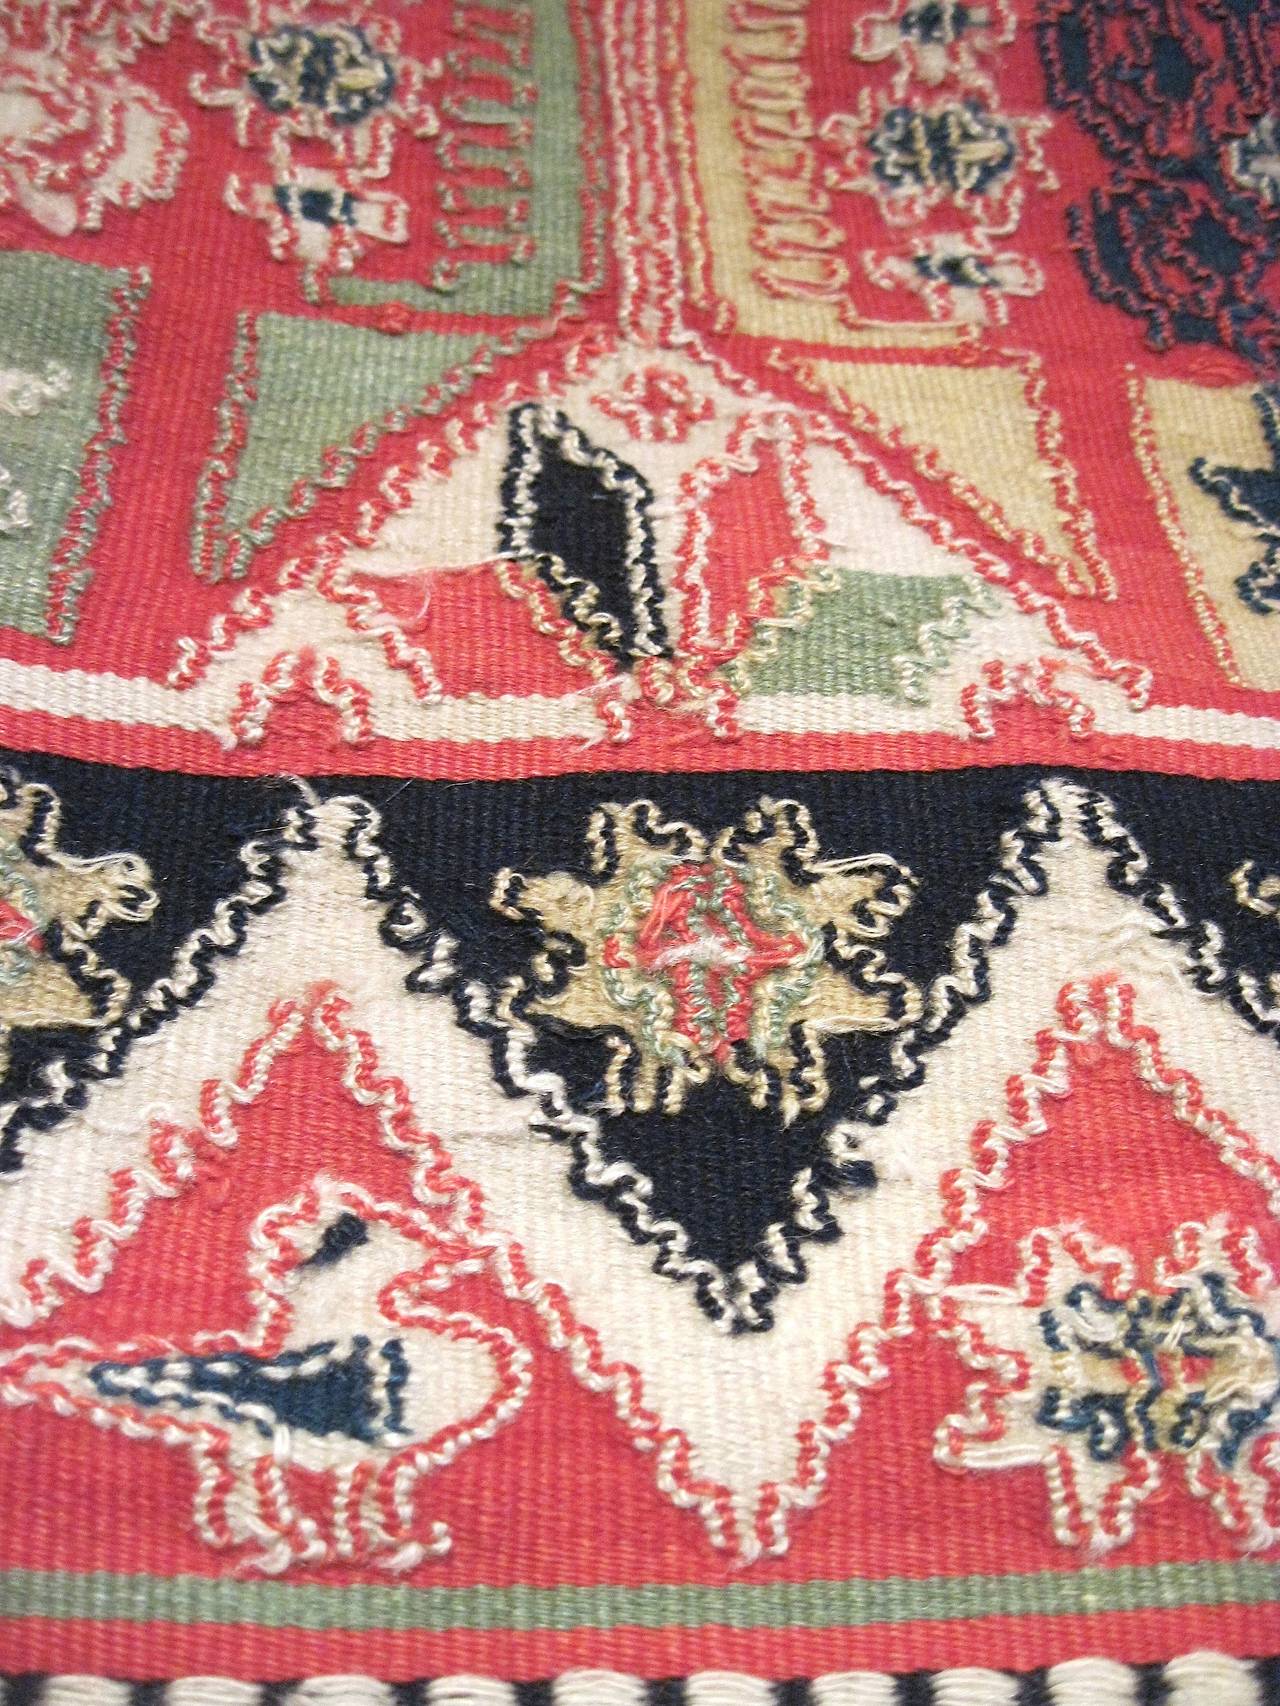 Early Handwoven Swedish Bridal or Dowry Bedcover, 1806 2